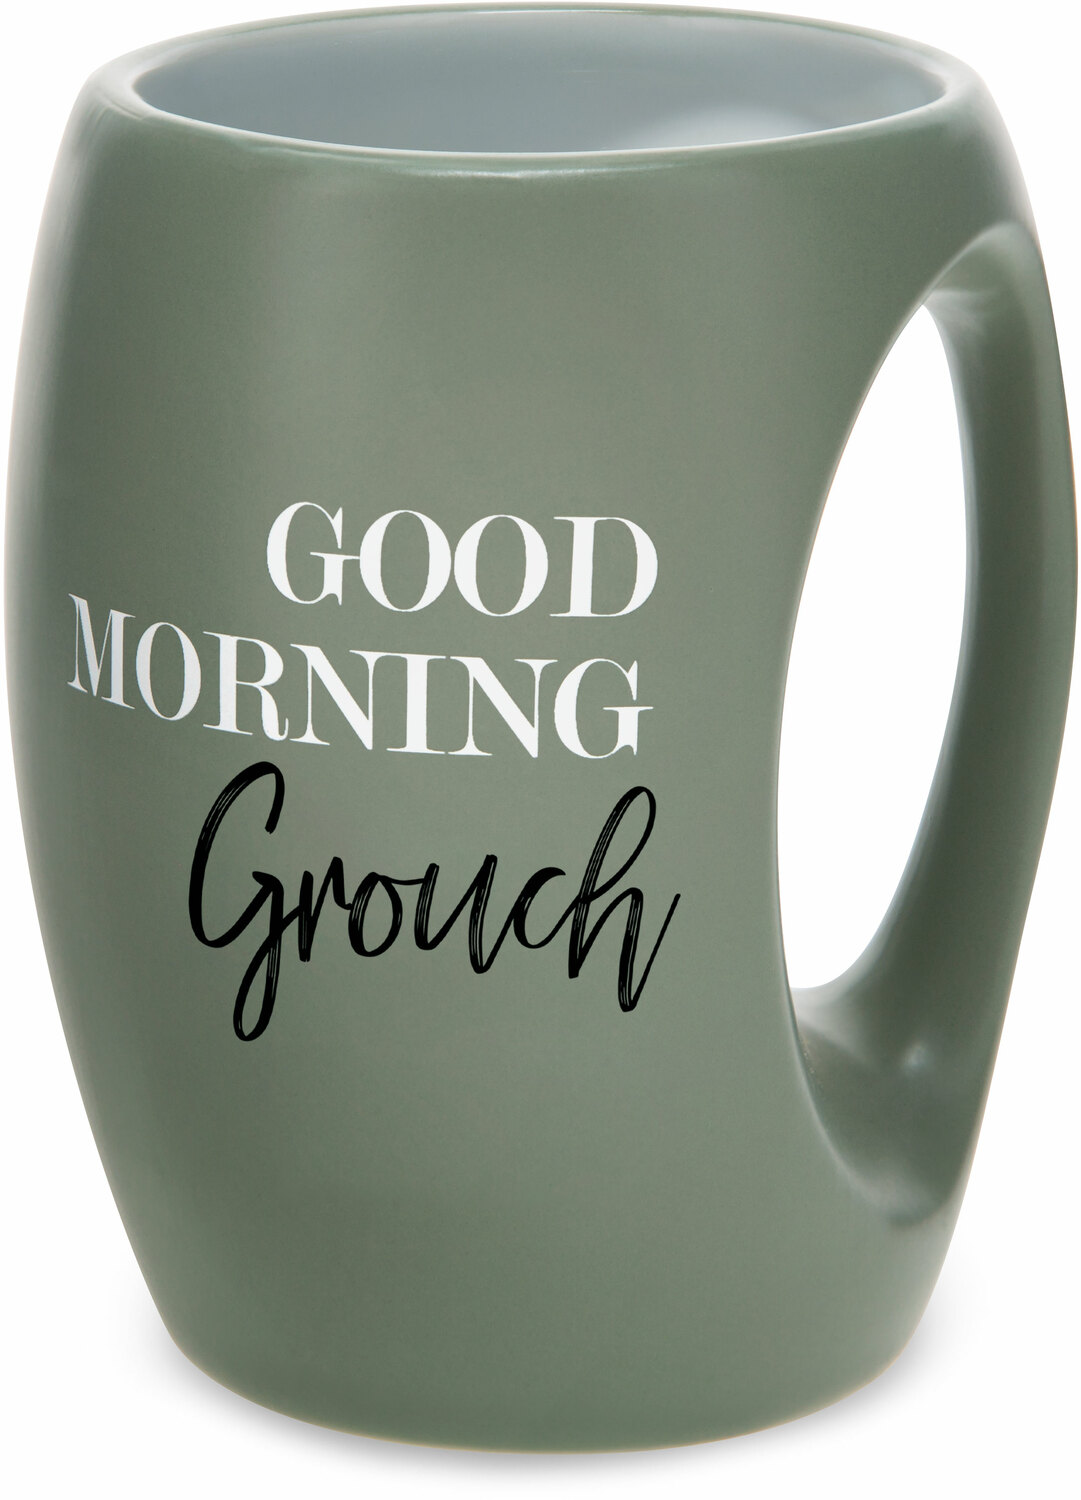 Grouch by Good Morning - Grouch - 16 oz Cup